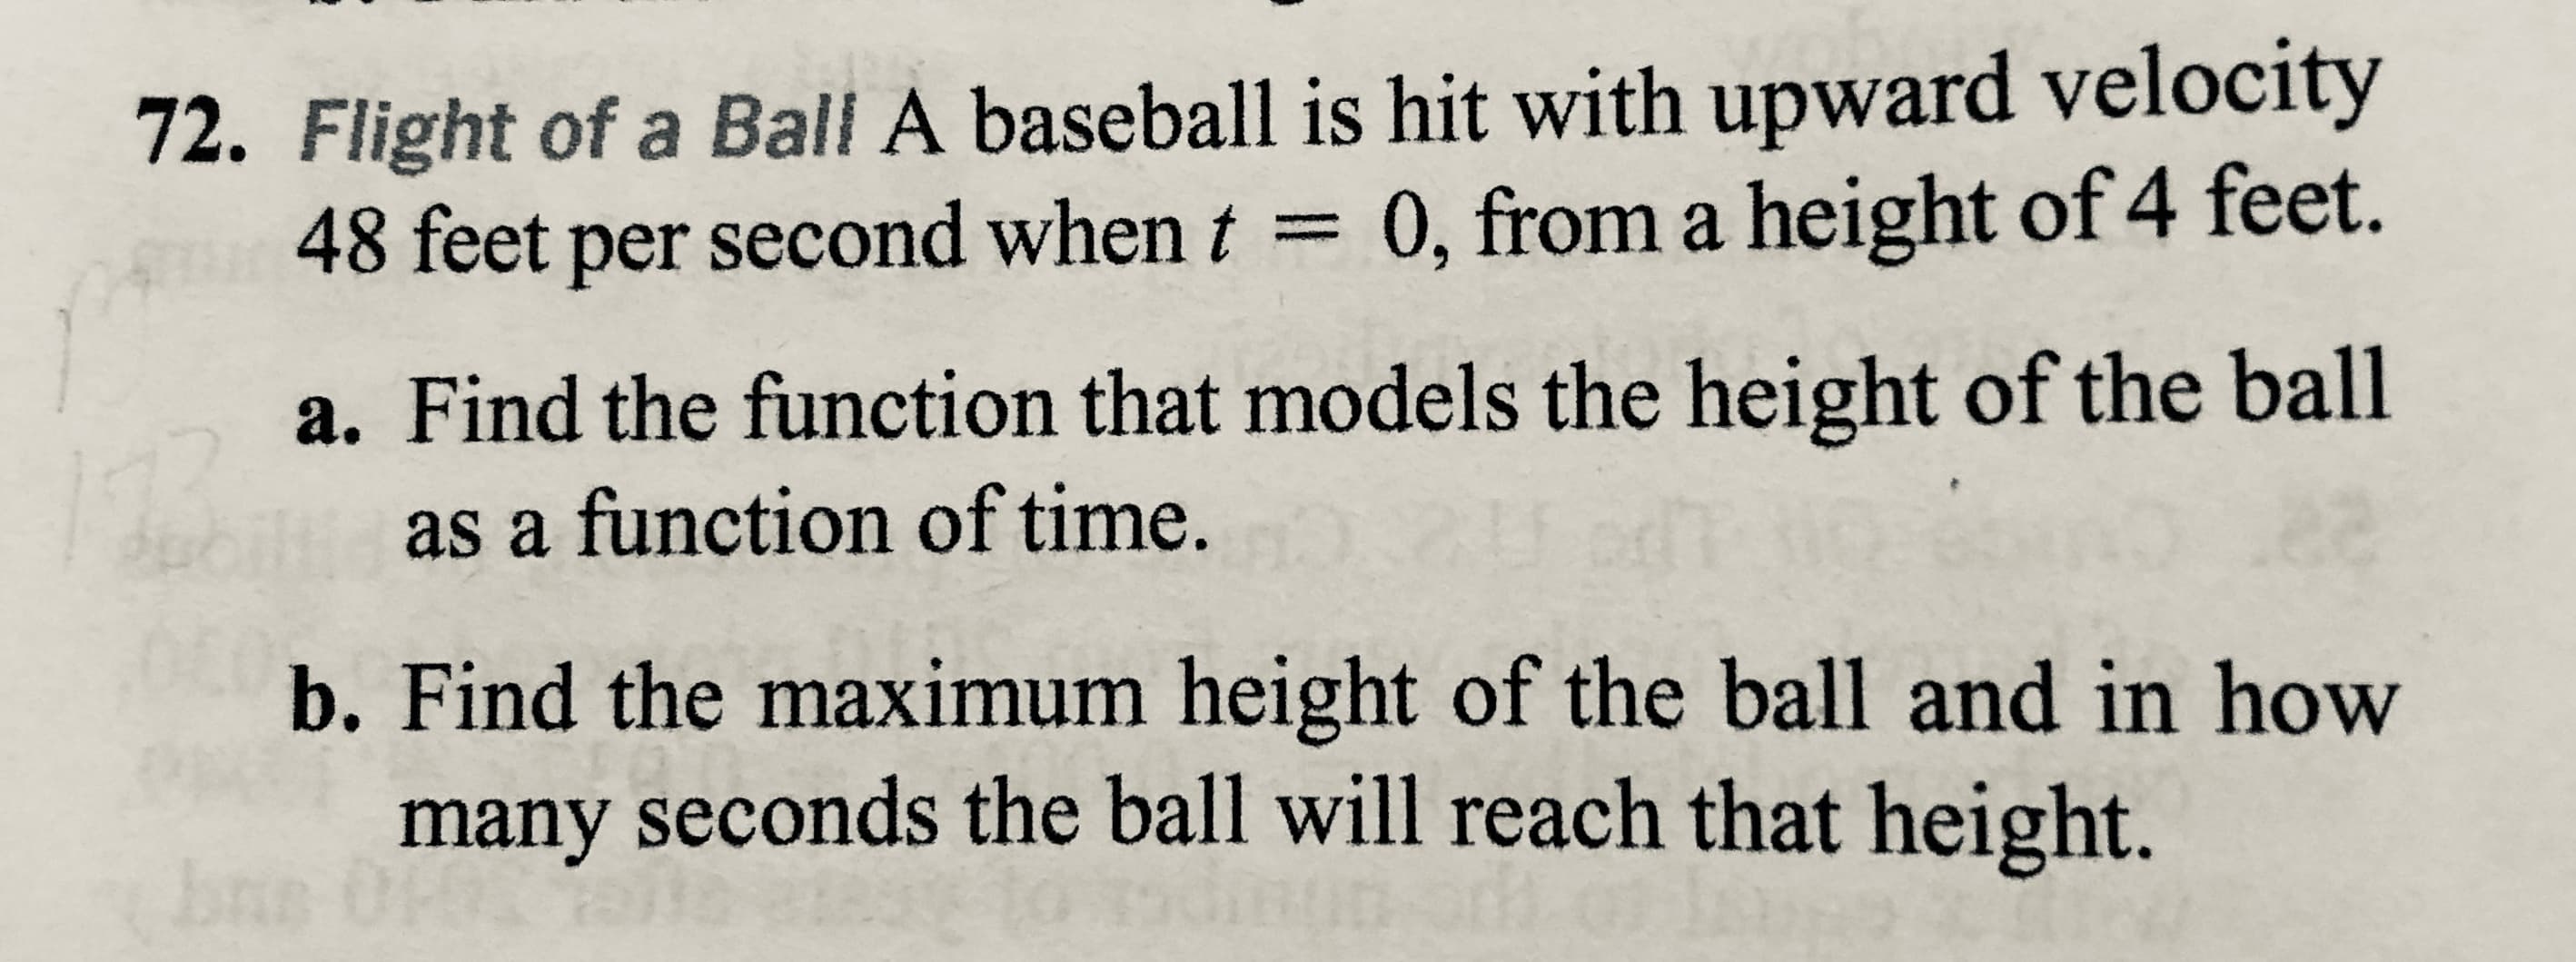 72. Flight of a Ball A baseball is hit with upward velocity
48 feet per second when t = 0, from a height of 4 feet.
a. Find the function that models the height of the ball
as a function of time.
b. Find the maximum height of the ball and in how
many seconds the ball will reach that height.
